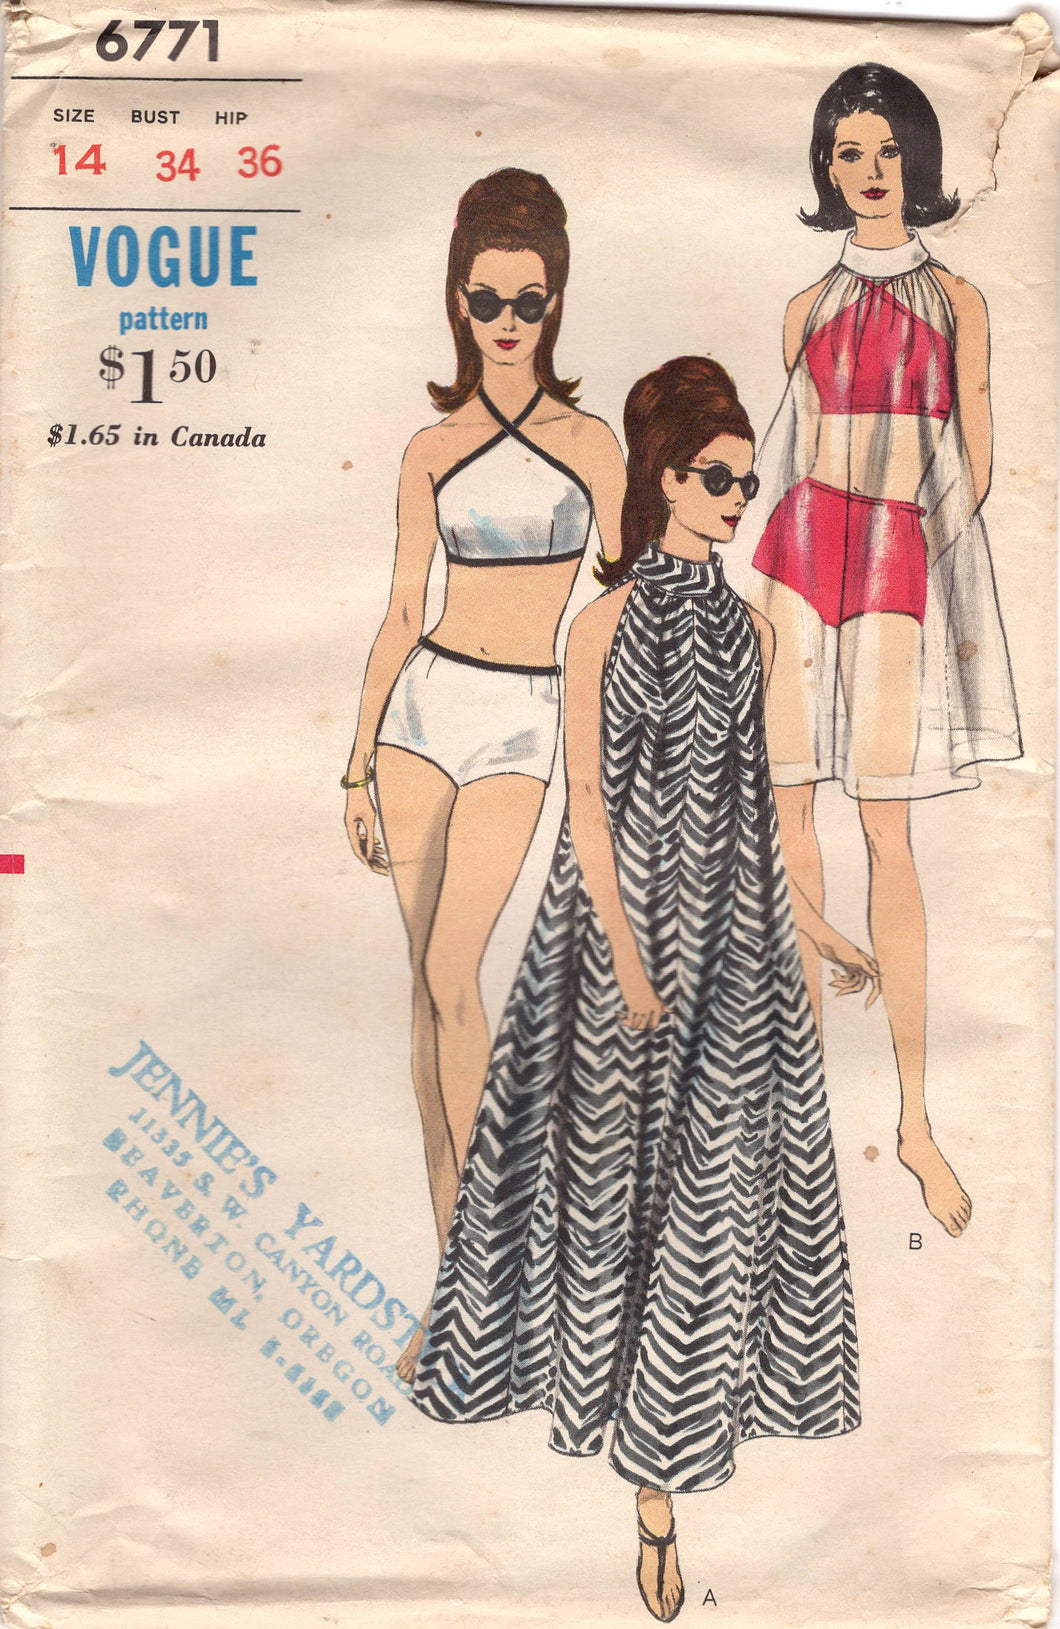 1960's Vogue Two Piece Swimsuit and Maxi or Midi Cover Up with Mandarin Collar - Bust 34